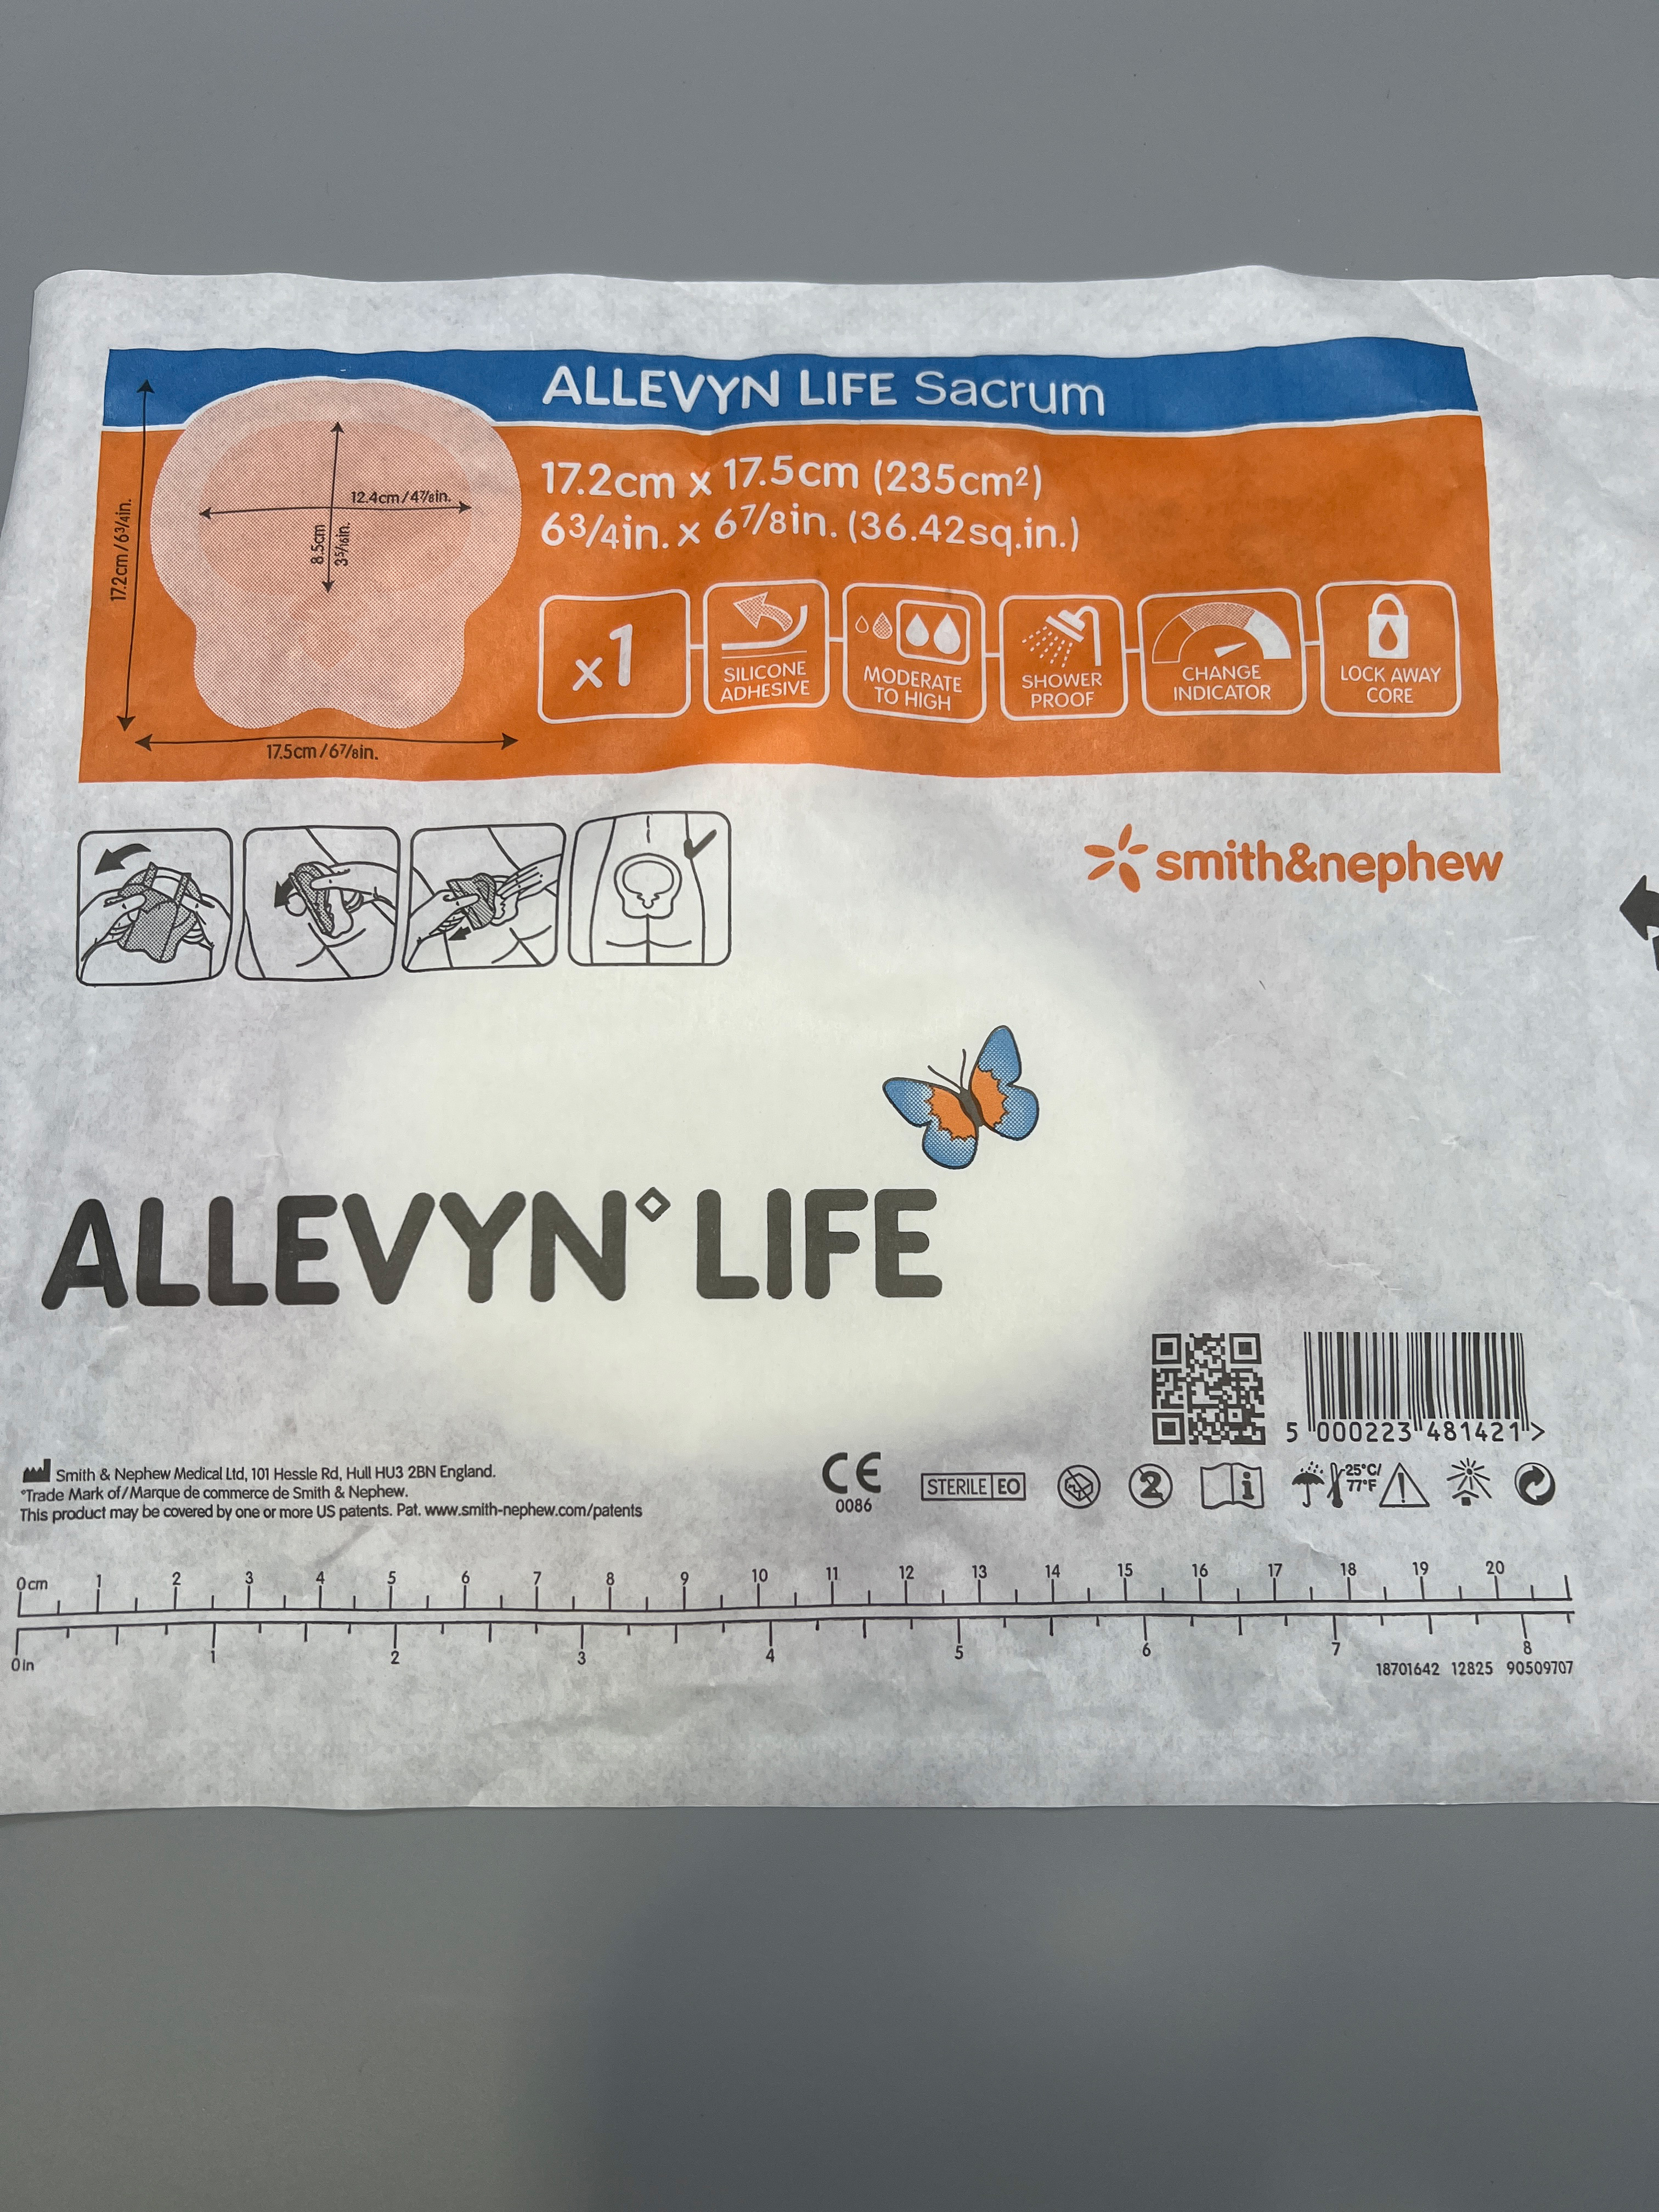 SILICONE FOAM DRESSING ALLEVYN LIFE 6 3/4IN X 6 7/8 SACRAL SILICONE ADHESIVE WITH BORDER STERILE